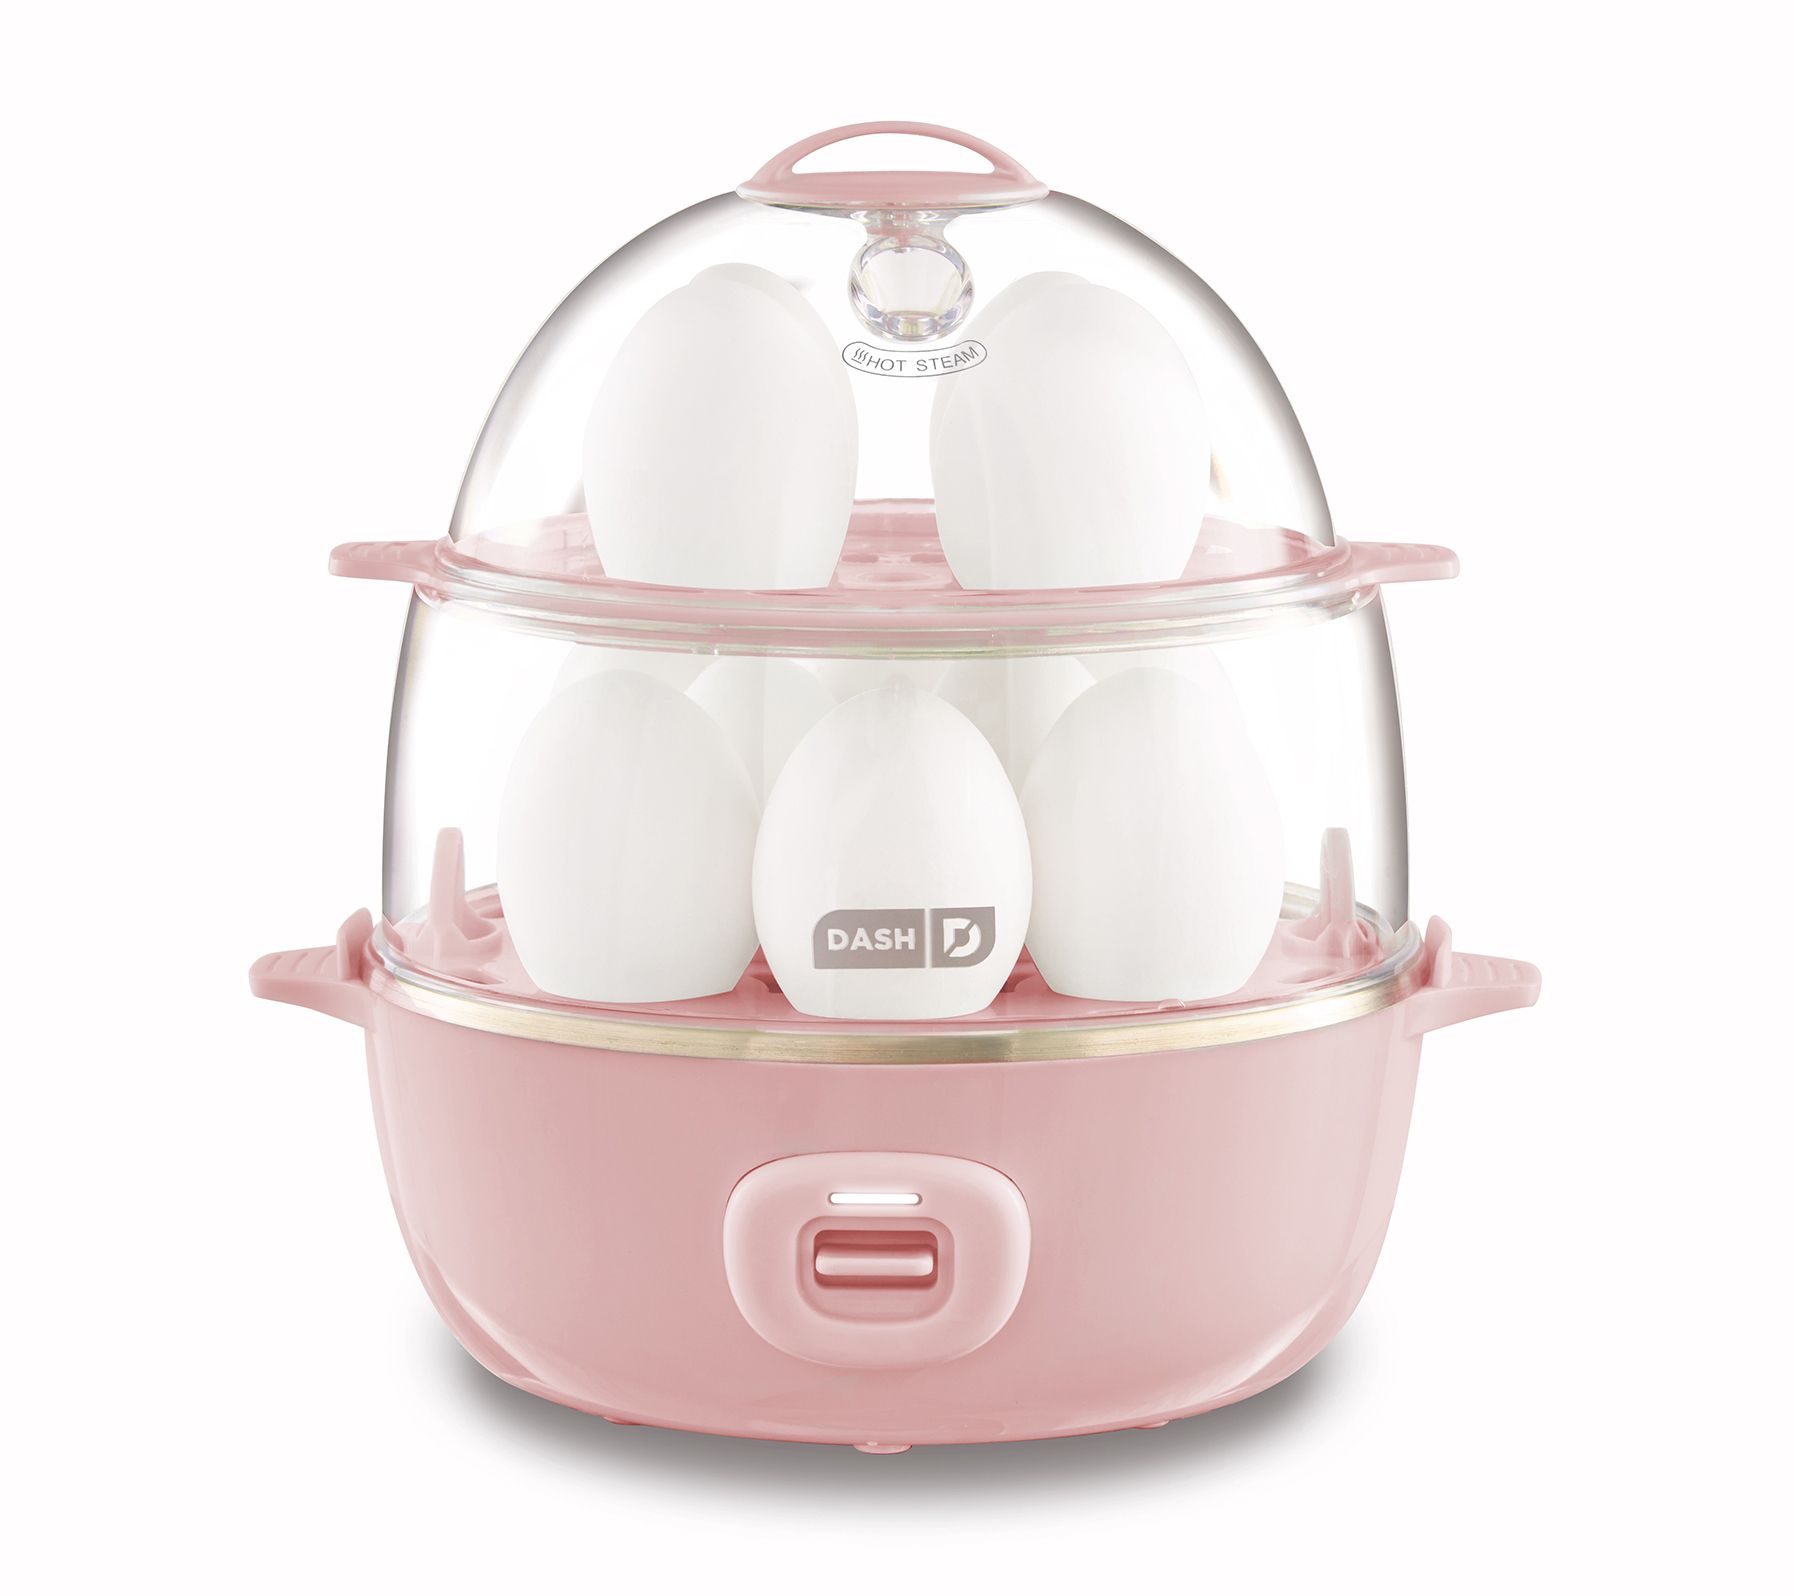 Dash Express Egg Cooker - Pale Yellow